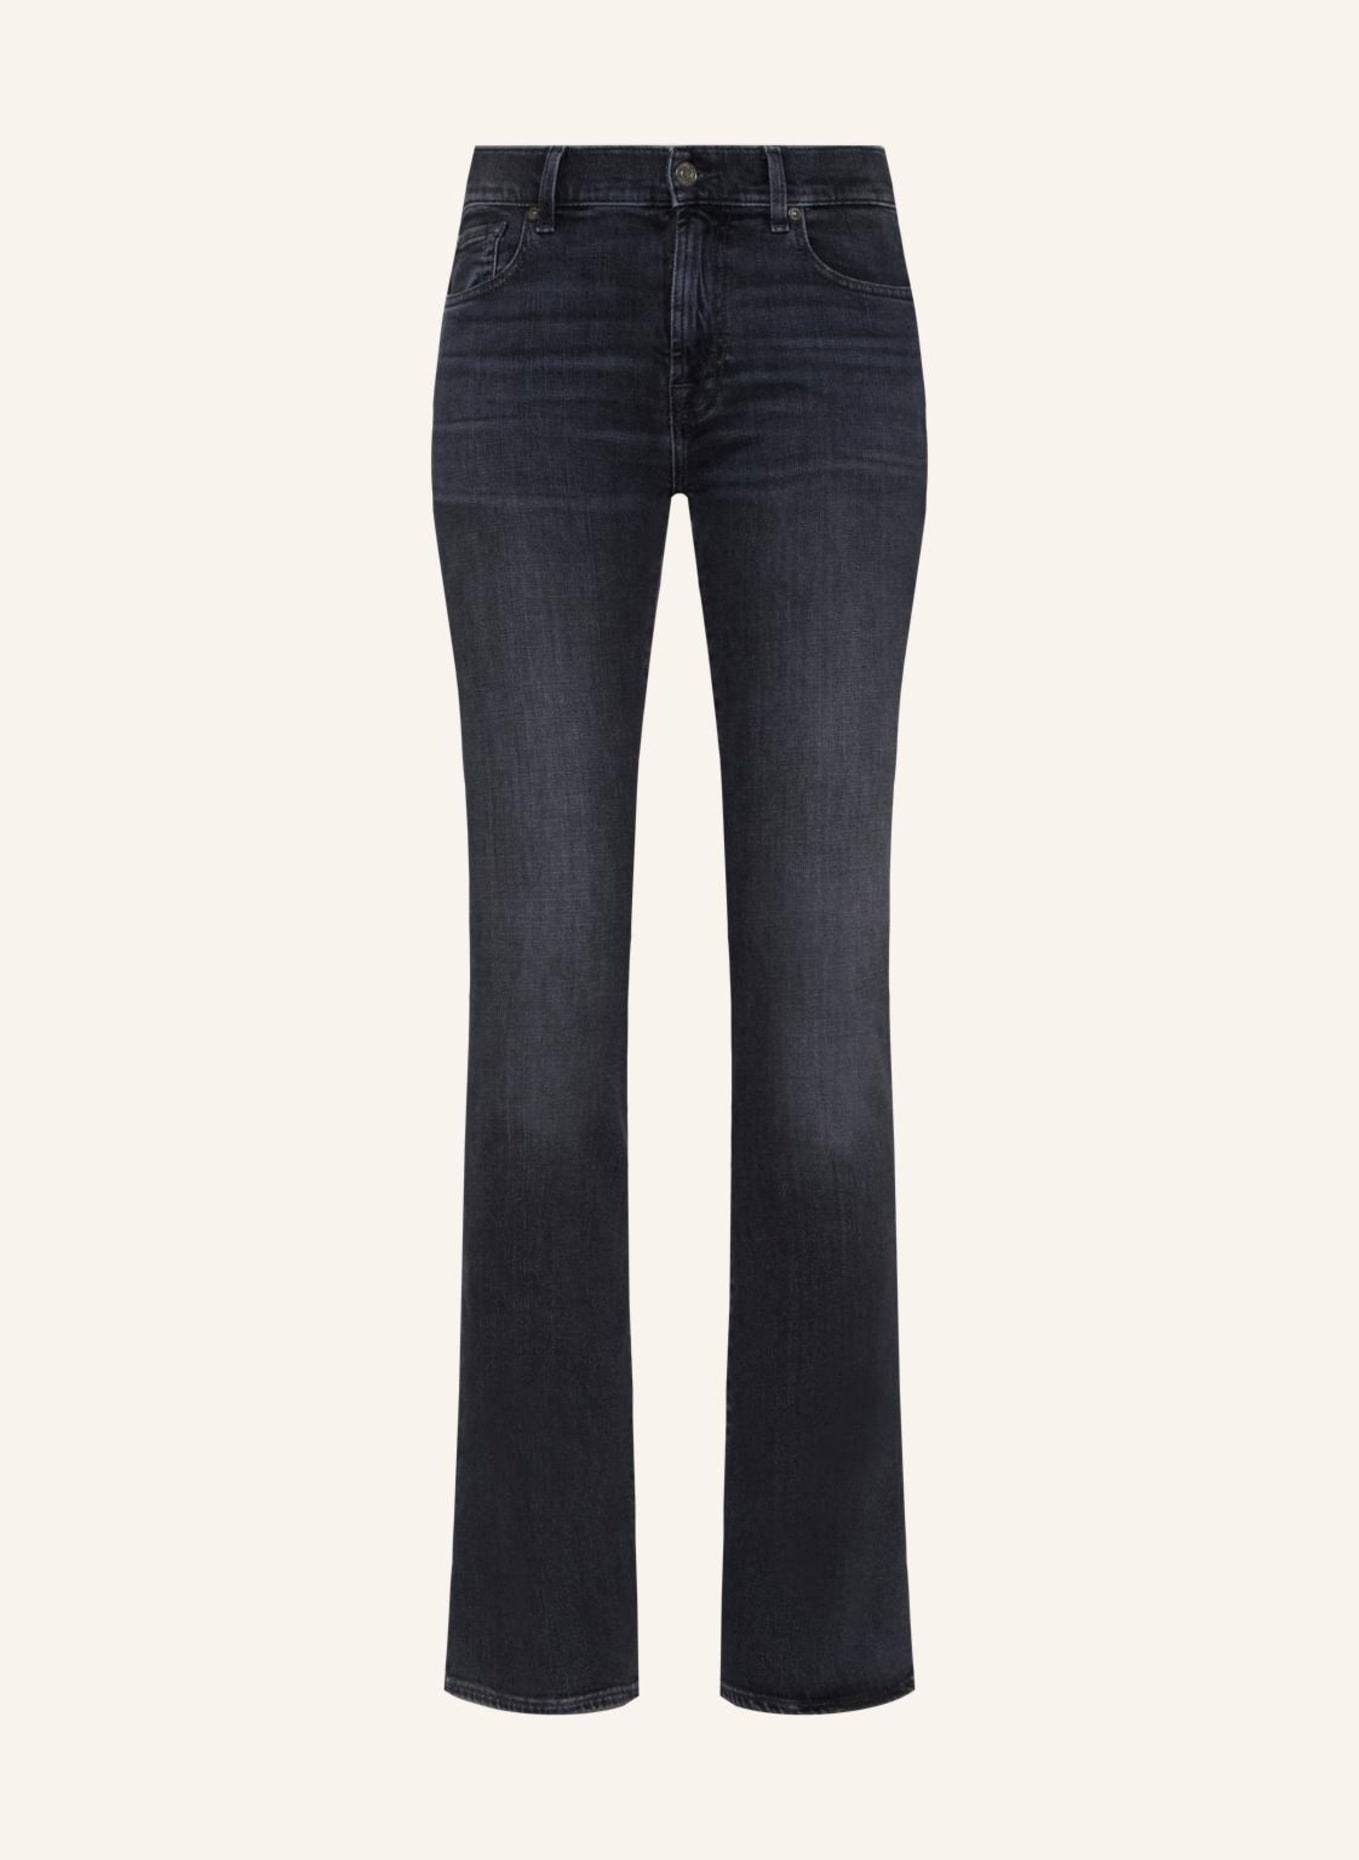 7 for all mankind Jeans BOOTCUT Bootcut Fit, Farbe: GRAU (Bild 1)